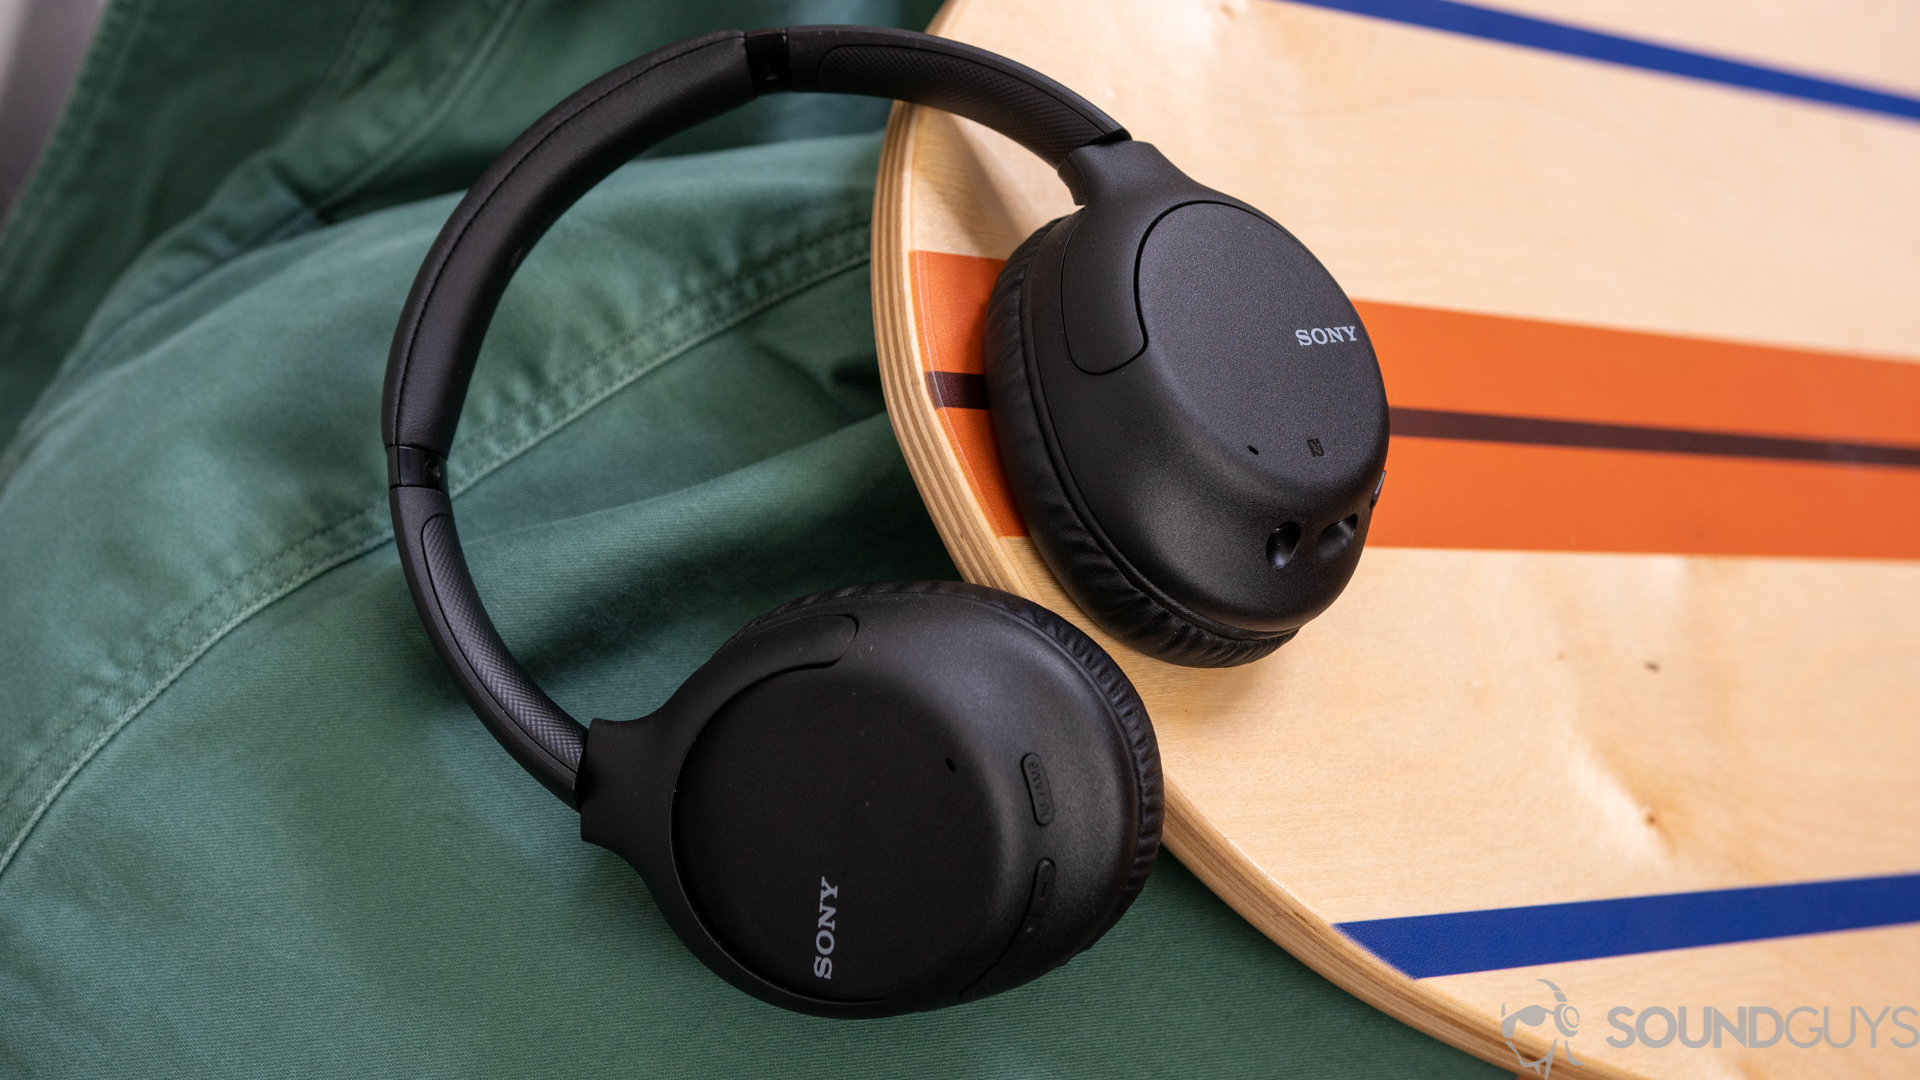 A picture of the Sony WH-CH710N noise canceling headphones on a wooden balance board and green jacket